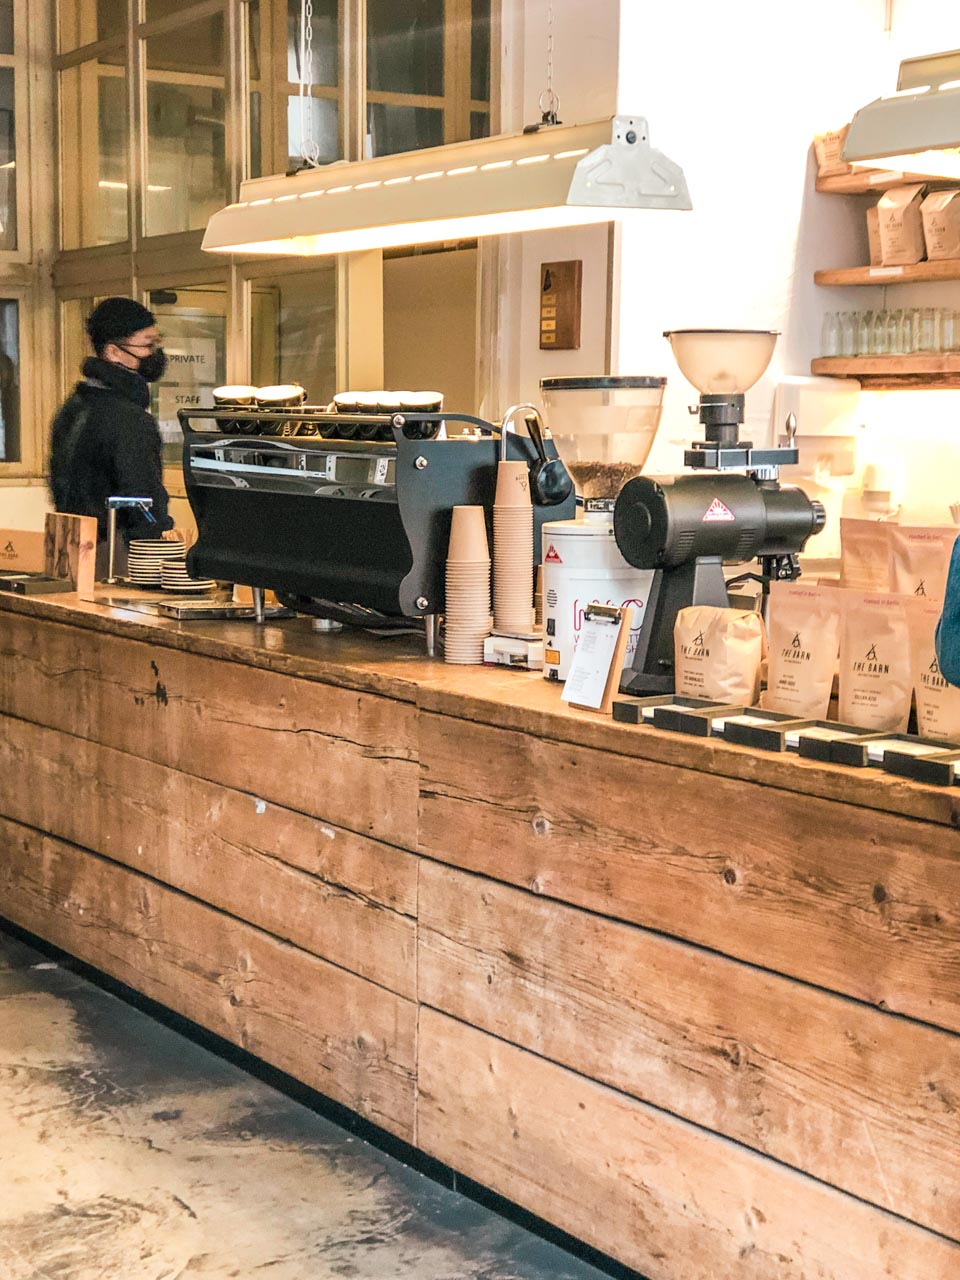 Espresso machine and coffee grinders on a wooden counter inside The Barn Coffee Roastery in Berlin